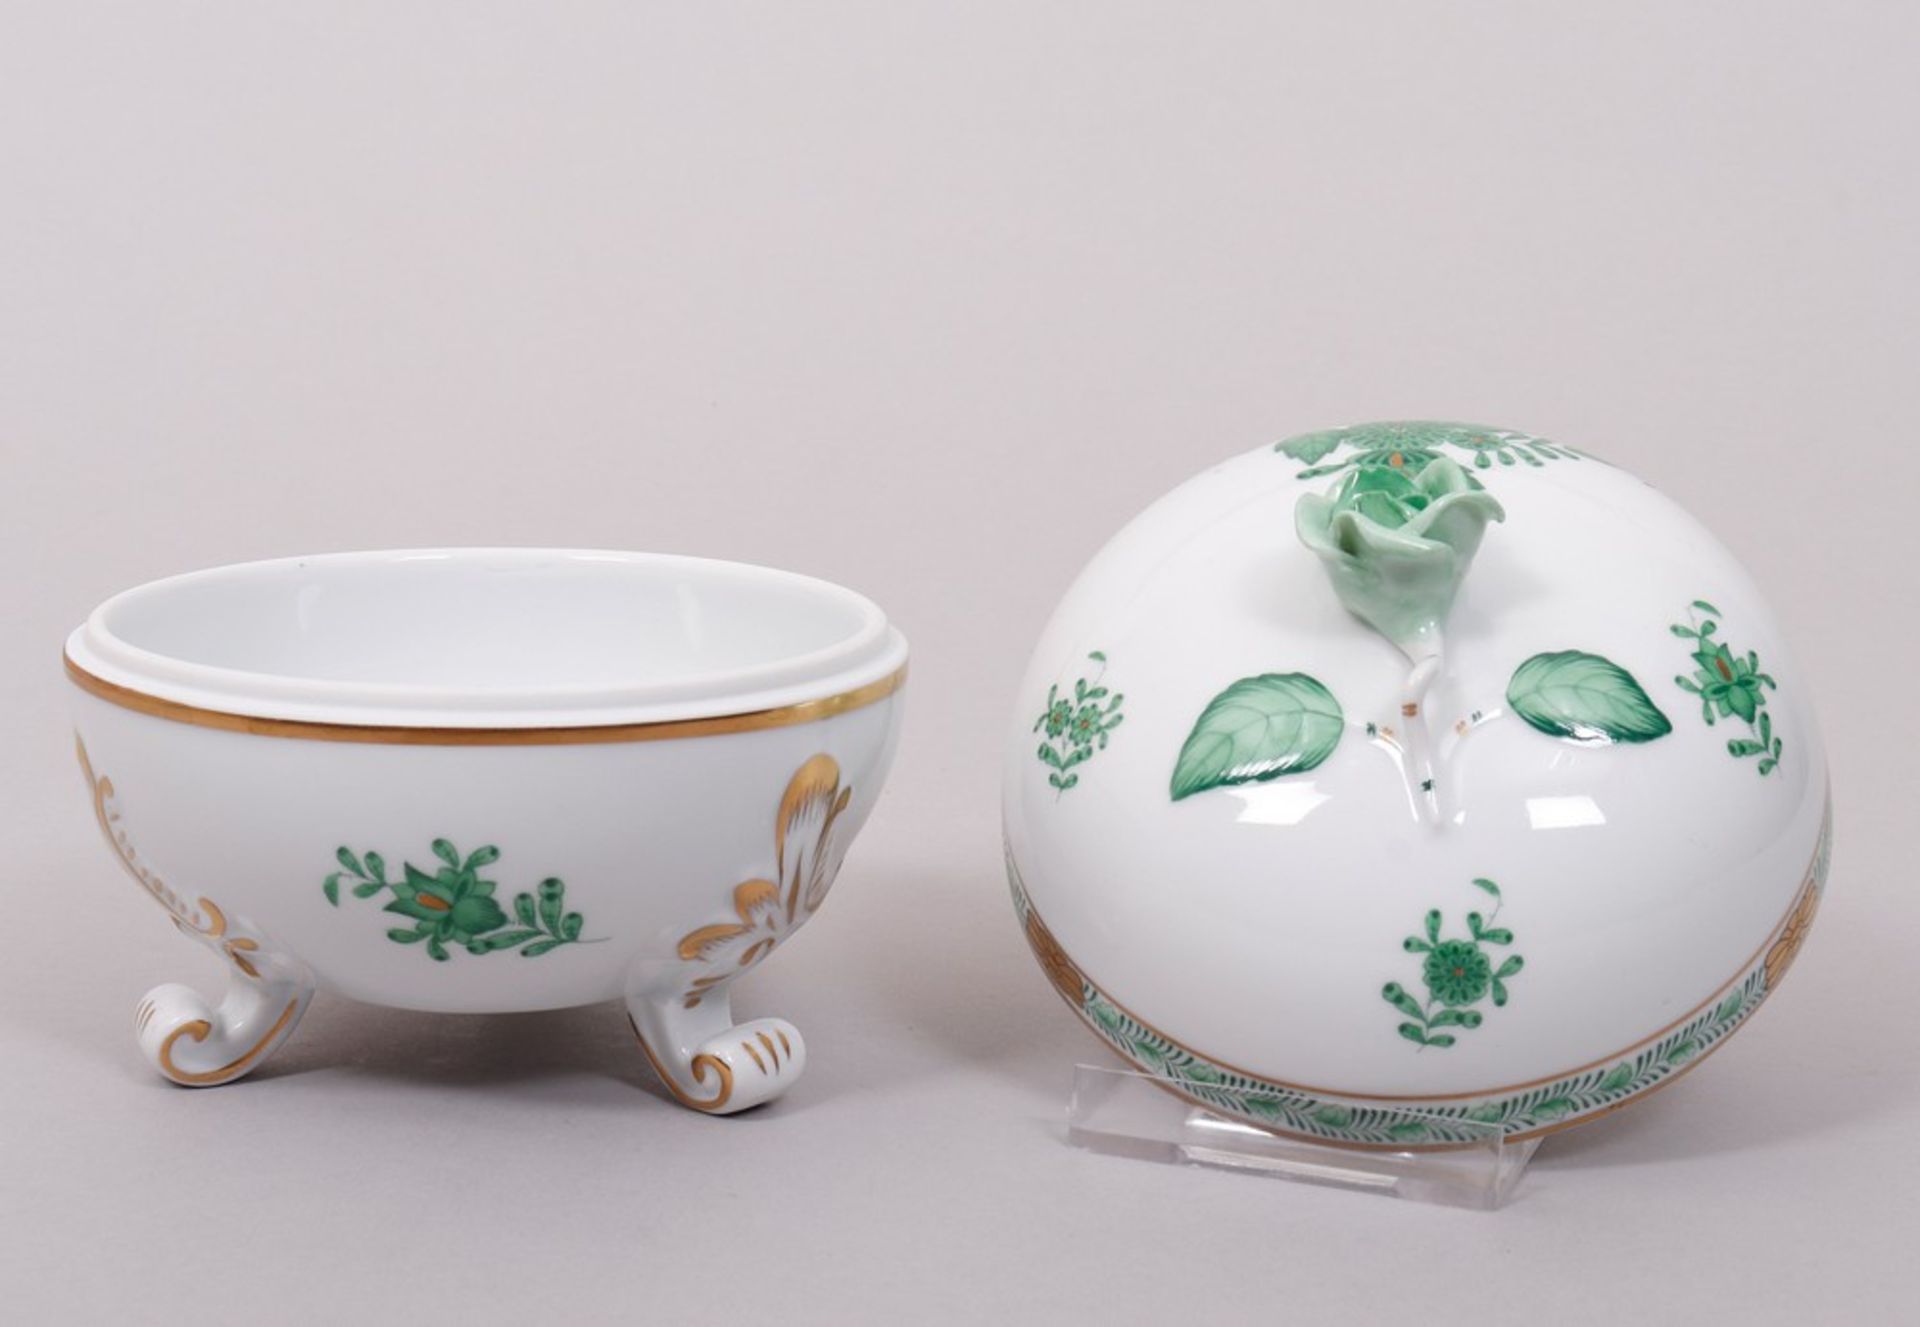 Two lidded boxes, Herend, Hungary, "Apponyi green" decor, 20th C. - Image 4 of 5